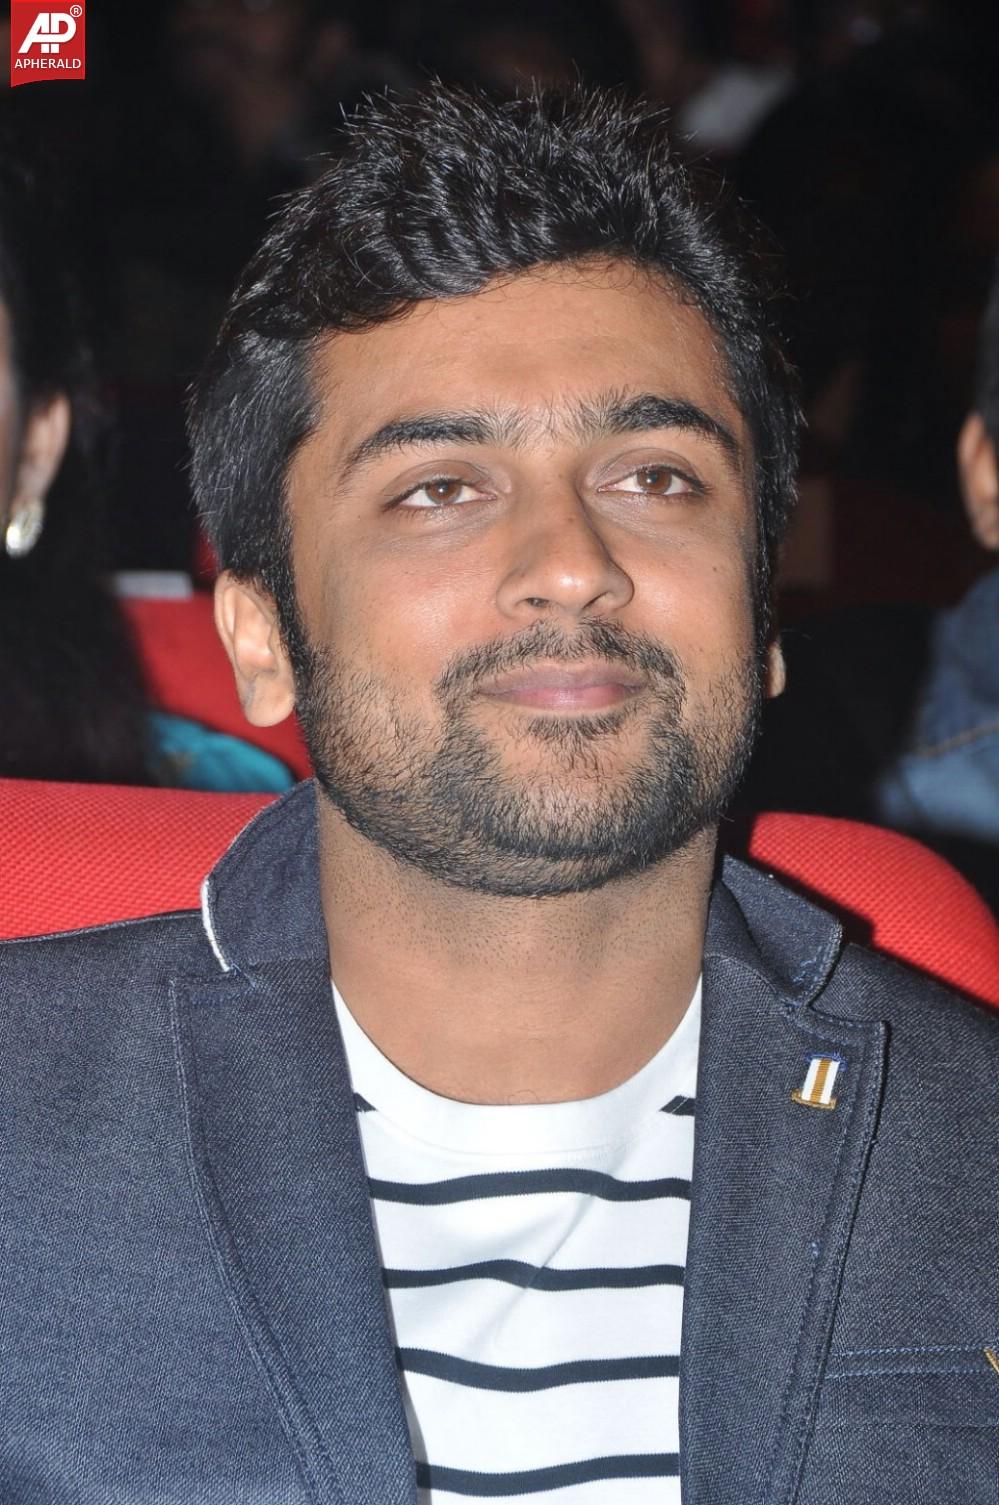 Pin by Telena Yesudurai on one and only him. | Surya actor, Actor photo,  Cute actors